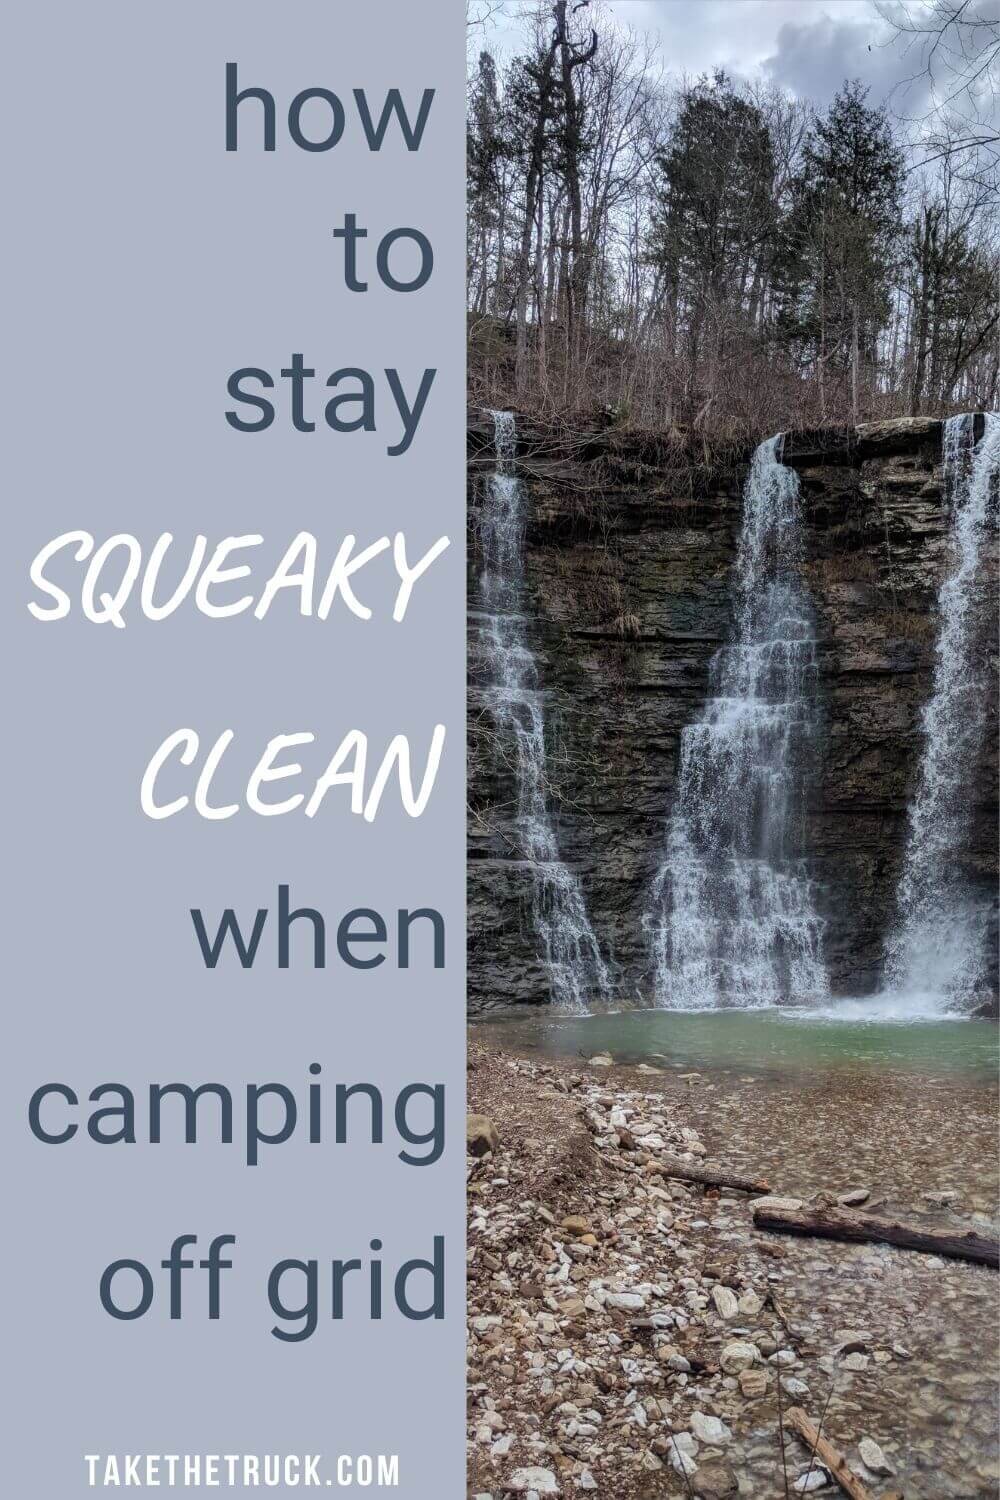 Wondering how to shower &amp; stay clean while camping or boondocking? This post tells just how to bathe when camping, giving all kinds of camping hygiene hacks &amp; tips for your camping trip.